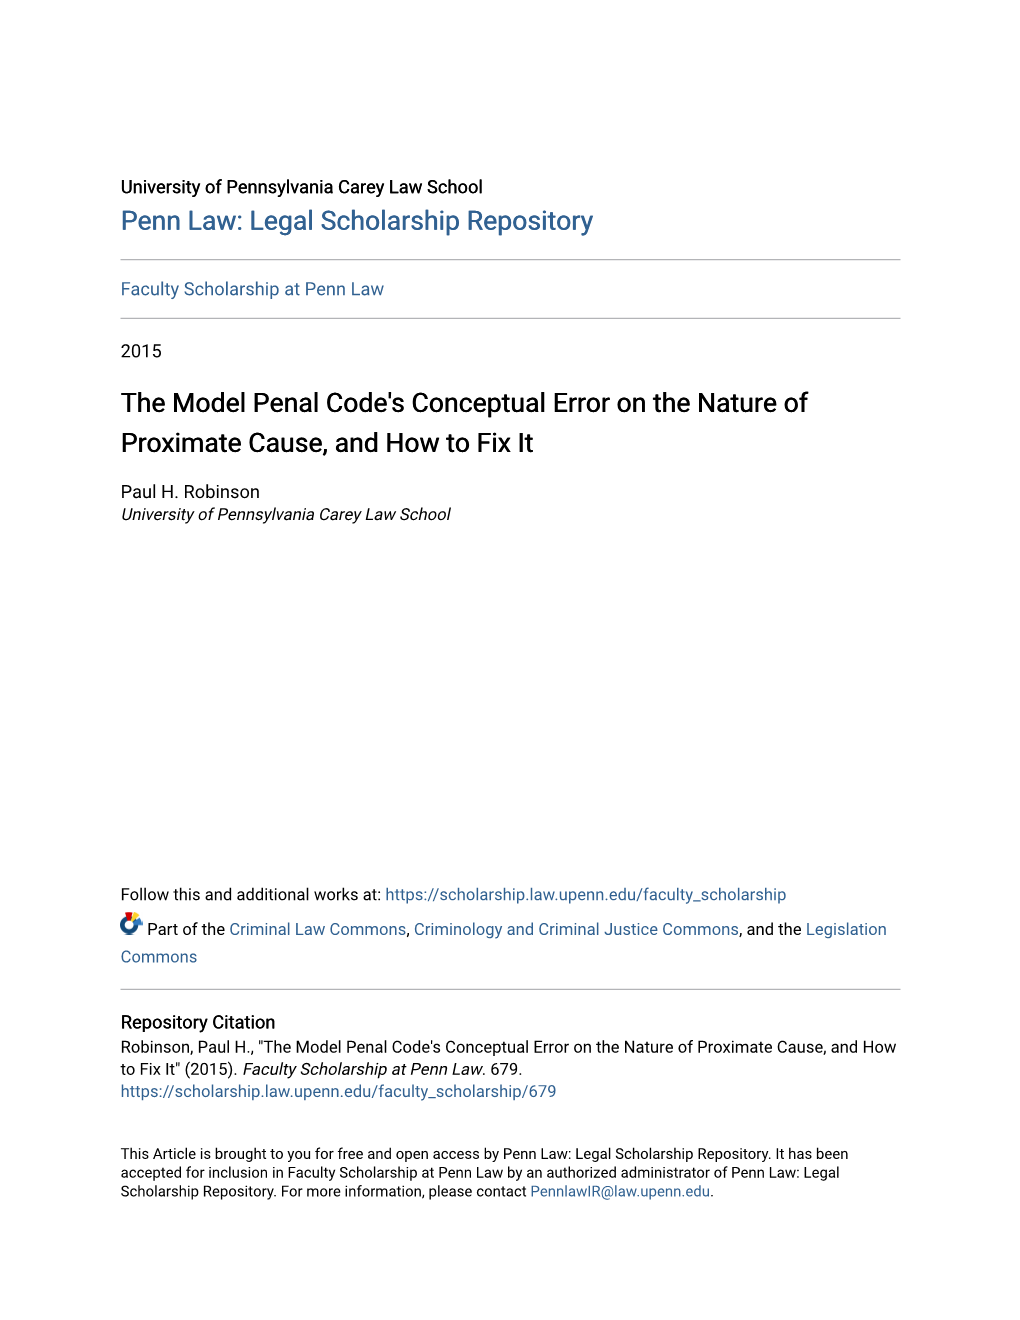 The Model Penal Code's Conceptual Error on the Nature of Proximate Cause, and How to Fix It